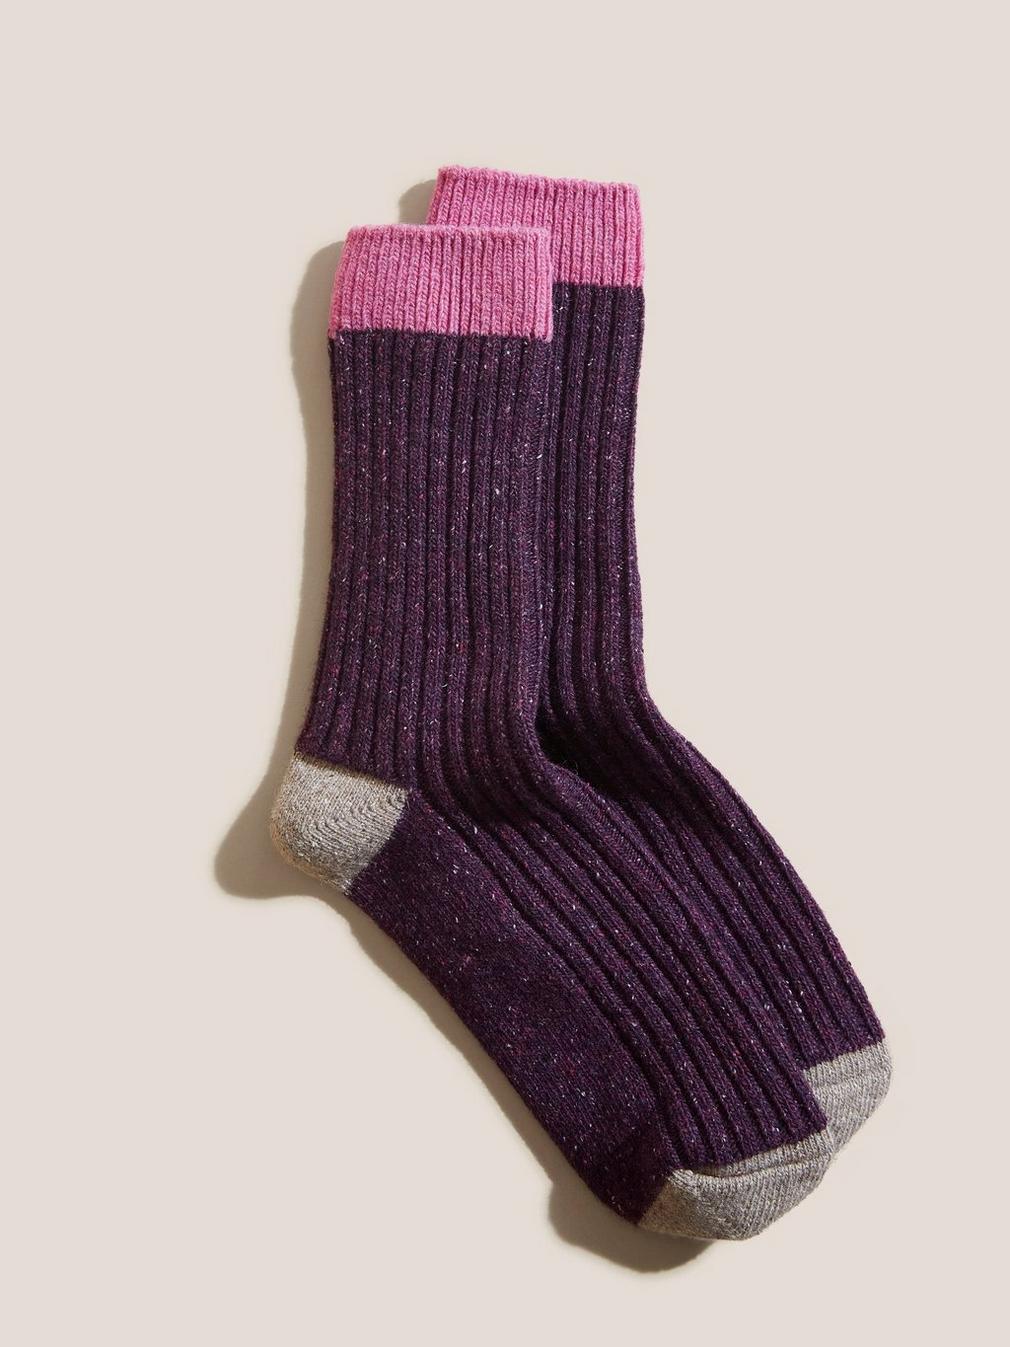 Nep Boot Socks in PINK MLT - FLAT FRONT